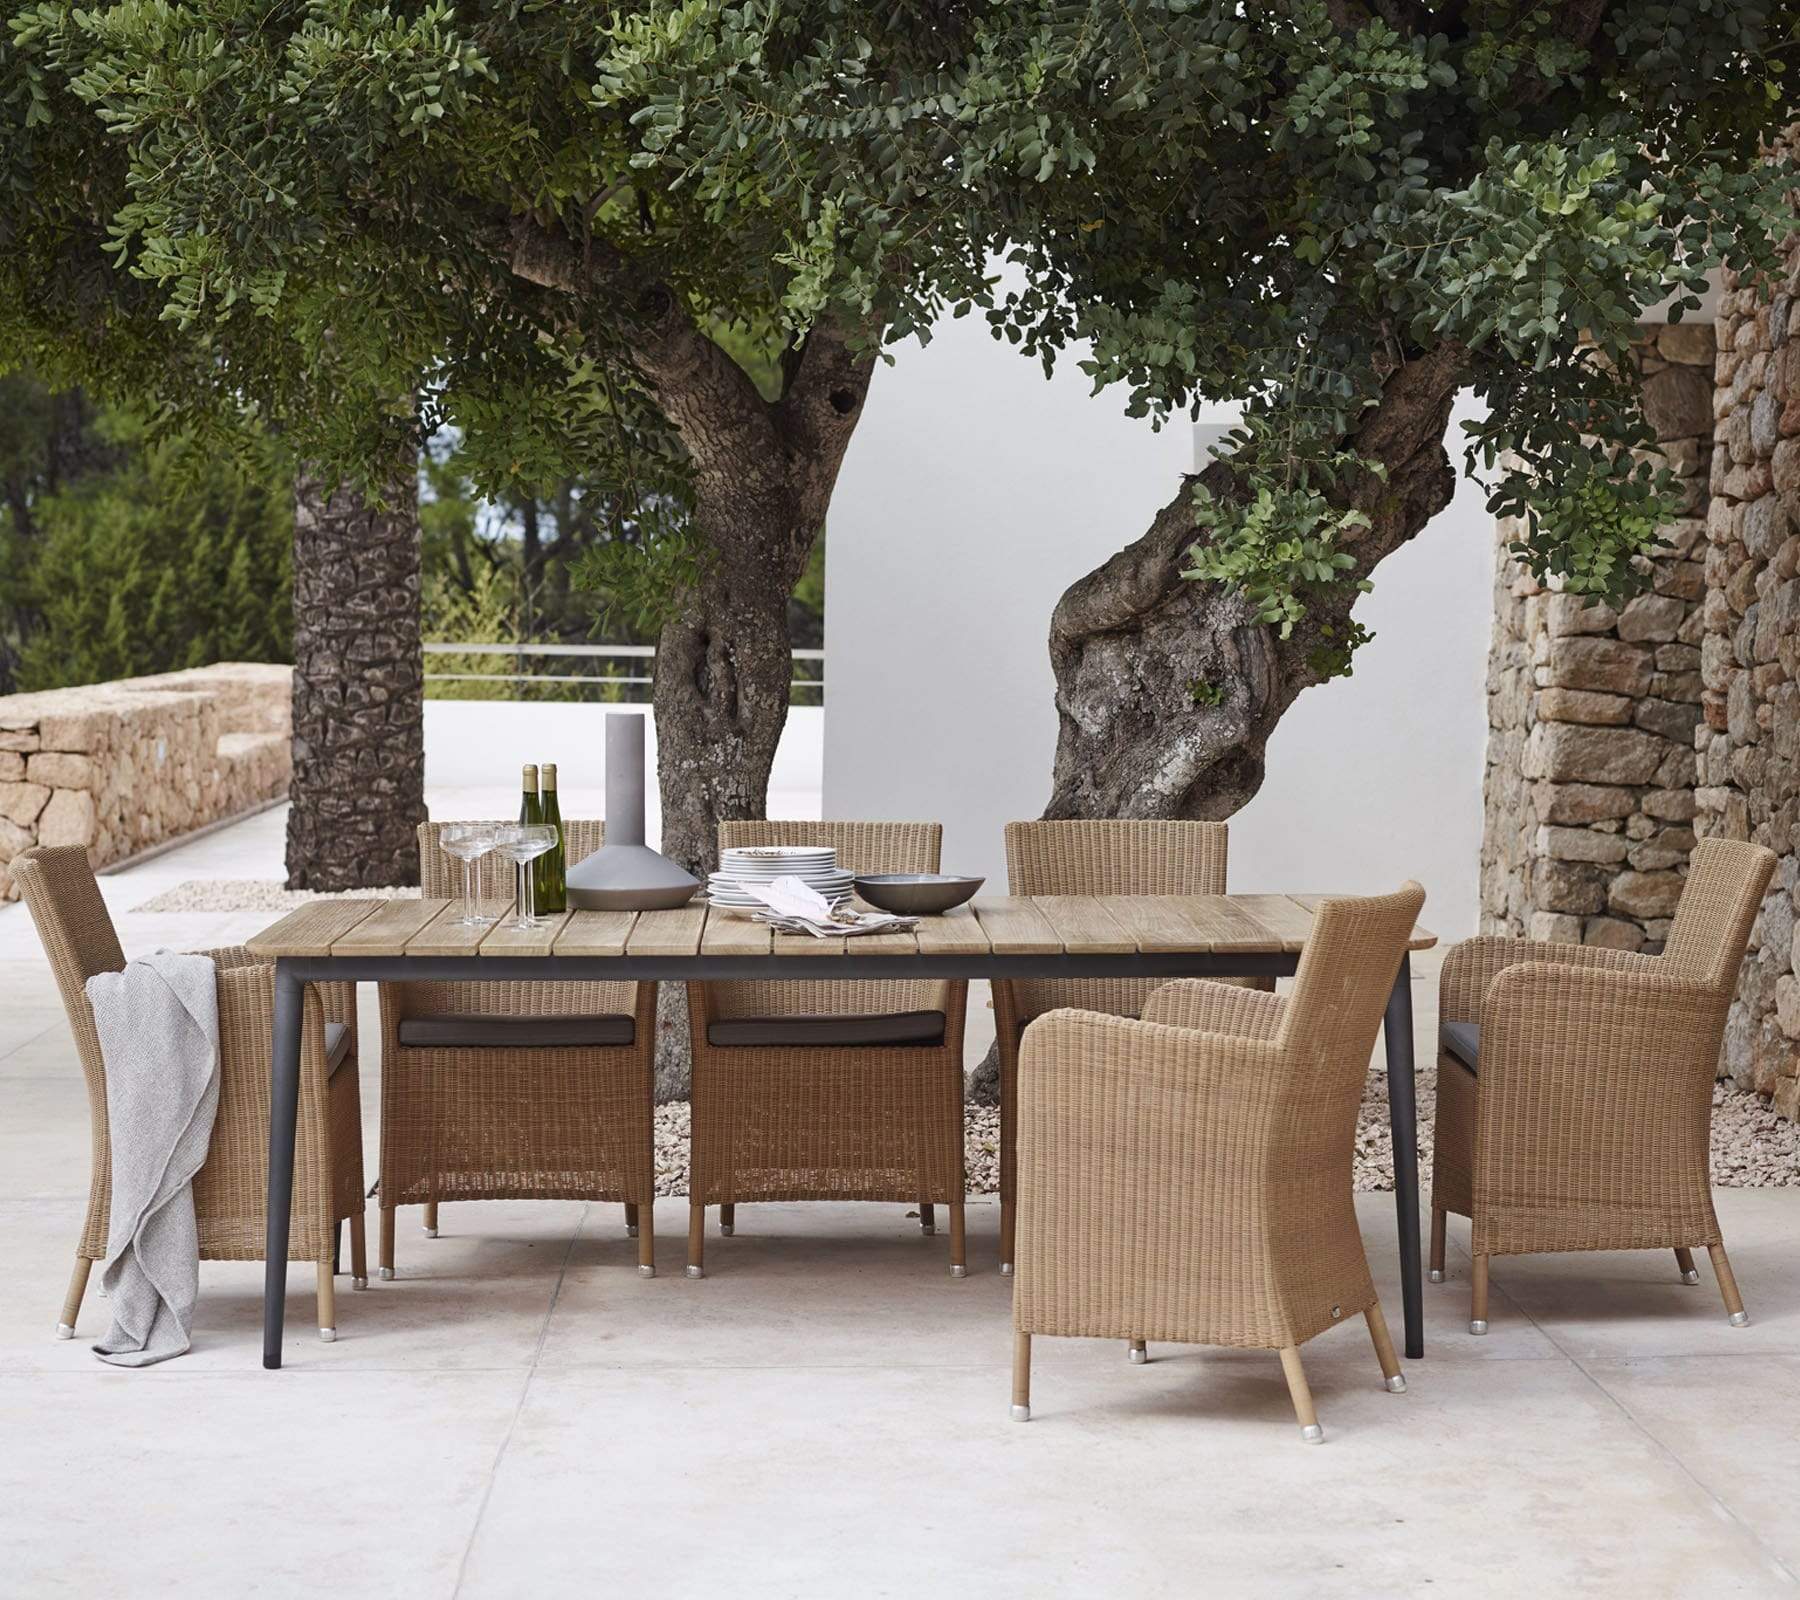 Boxhill's Hampsted Outdoor Dining Armchair lifestyle image with Core Garden Dining Table beside the tree at patio